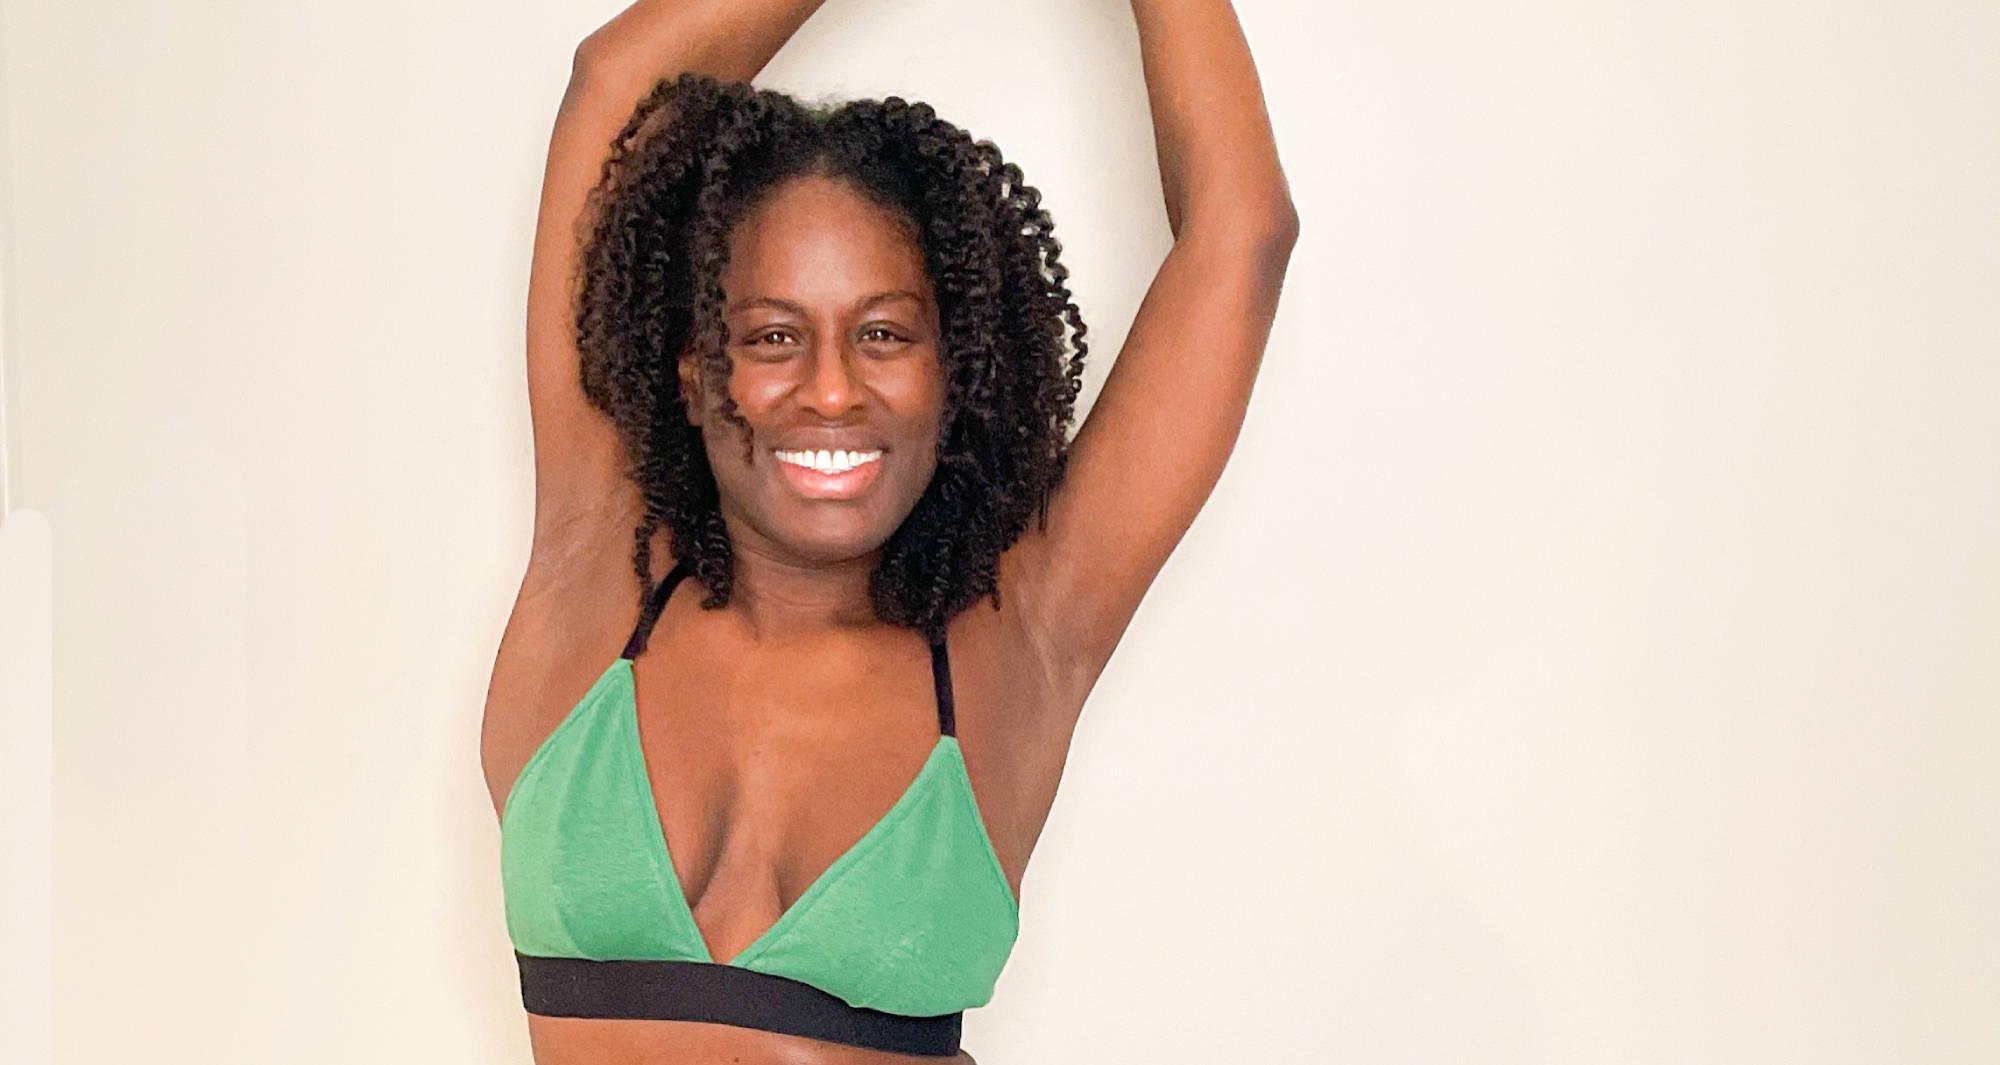 Black woman in green bralette puts her arms above her head.